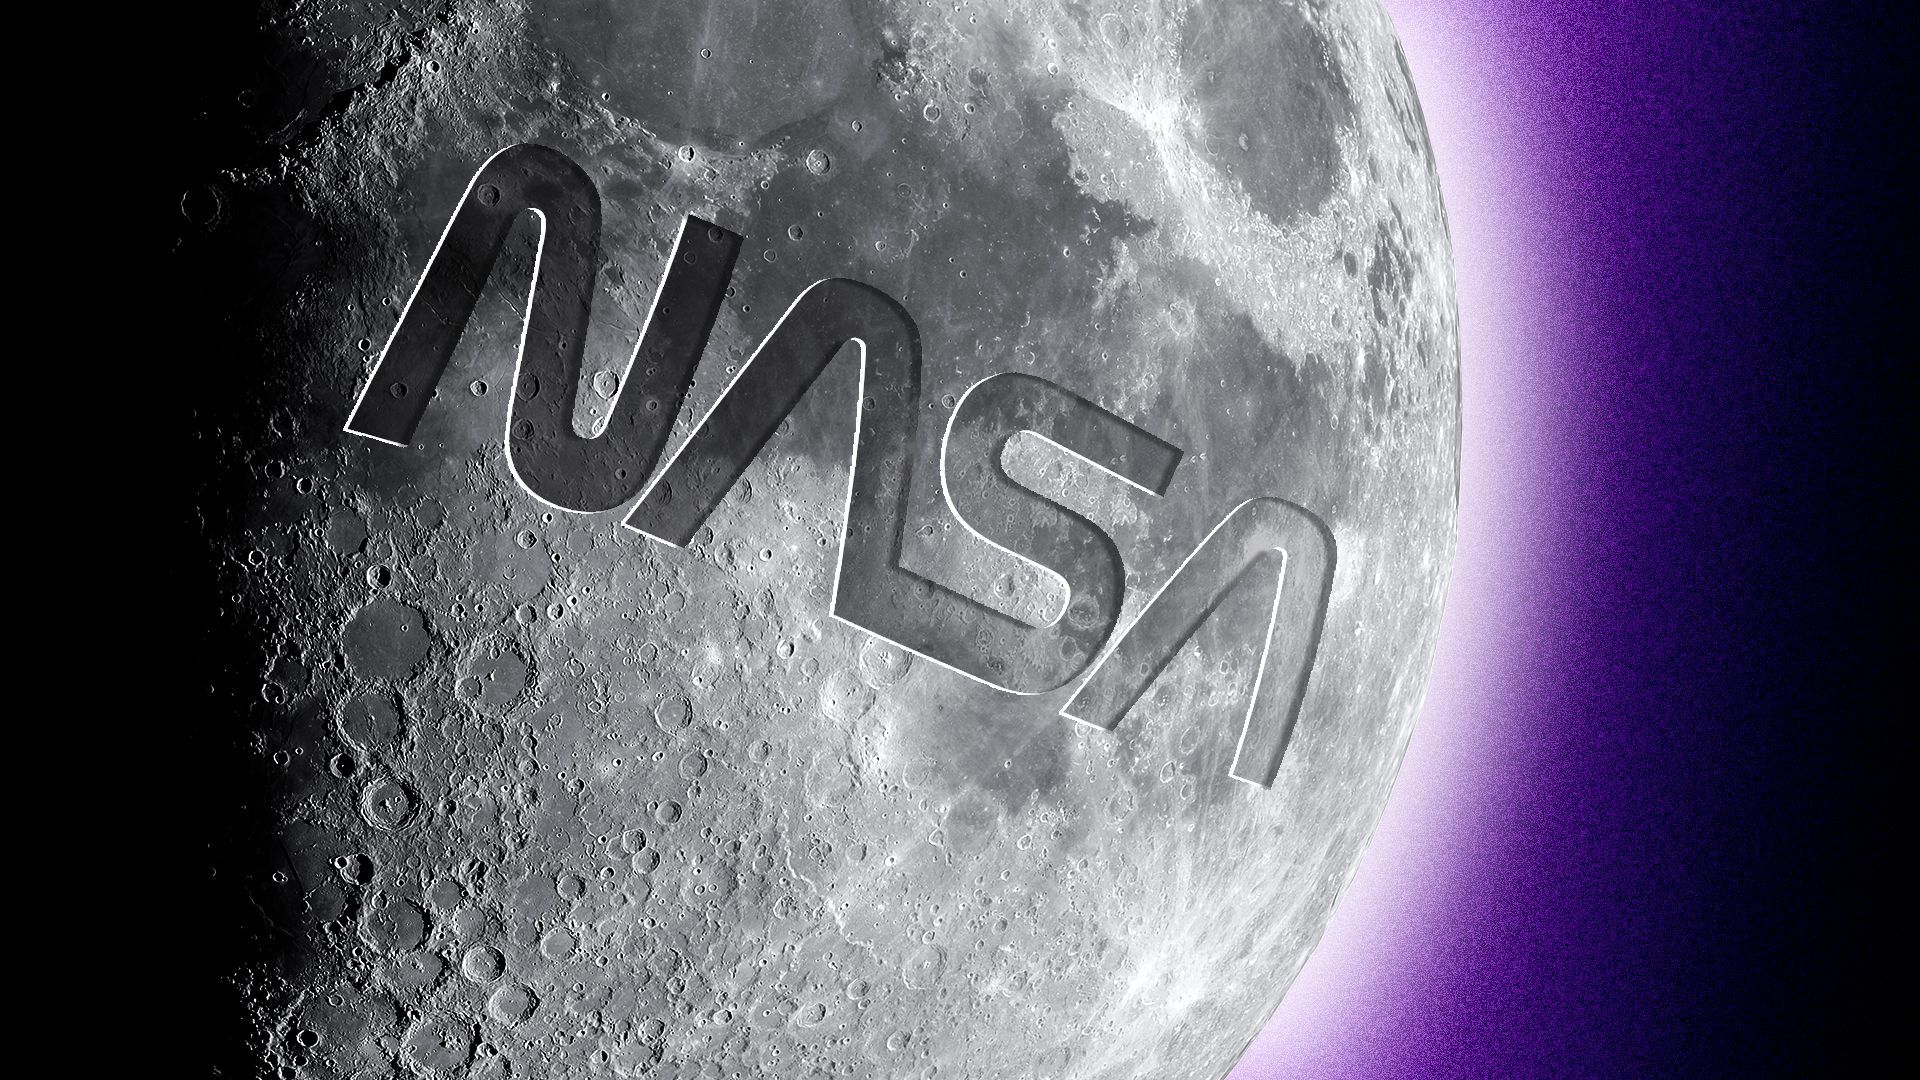 Illustration of the moon with NASA's logo chiseled into the side